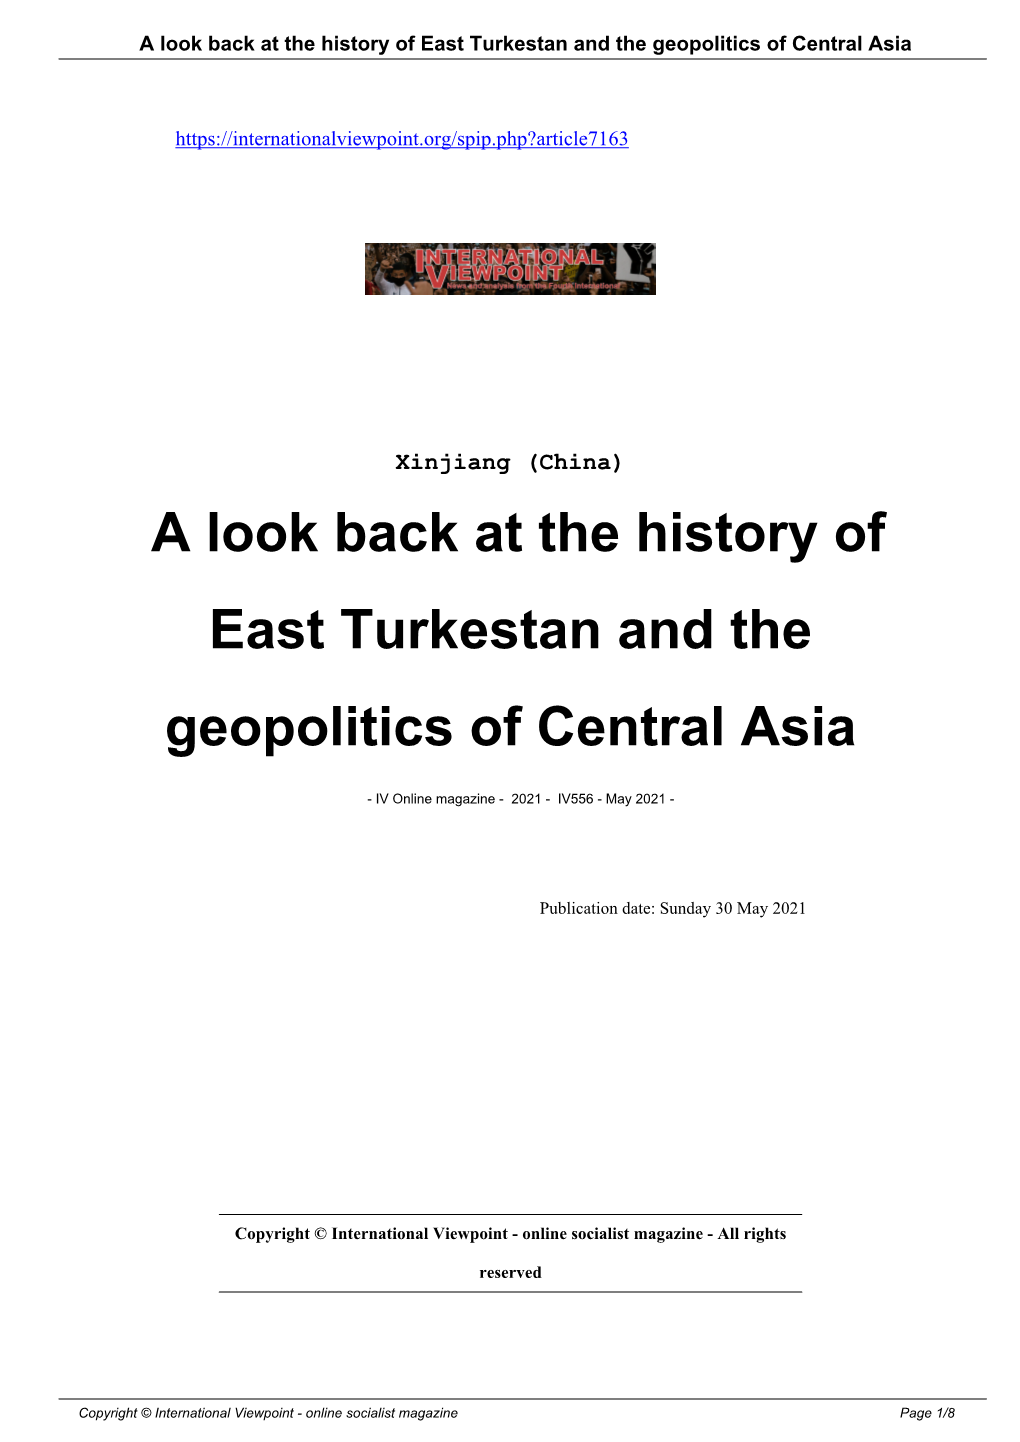 A Look Back at the History of East Turkestan and the Geopolitics of Central Asia